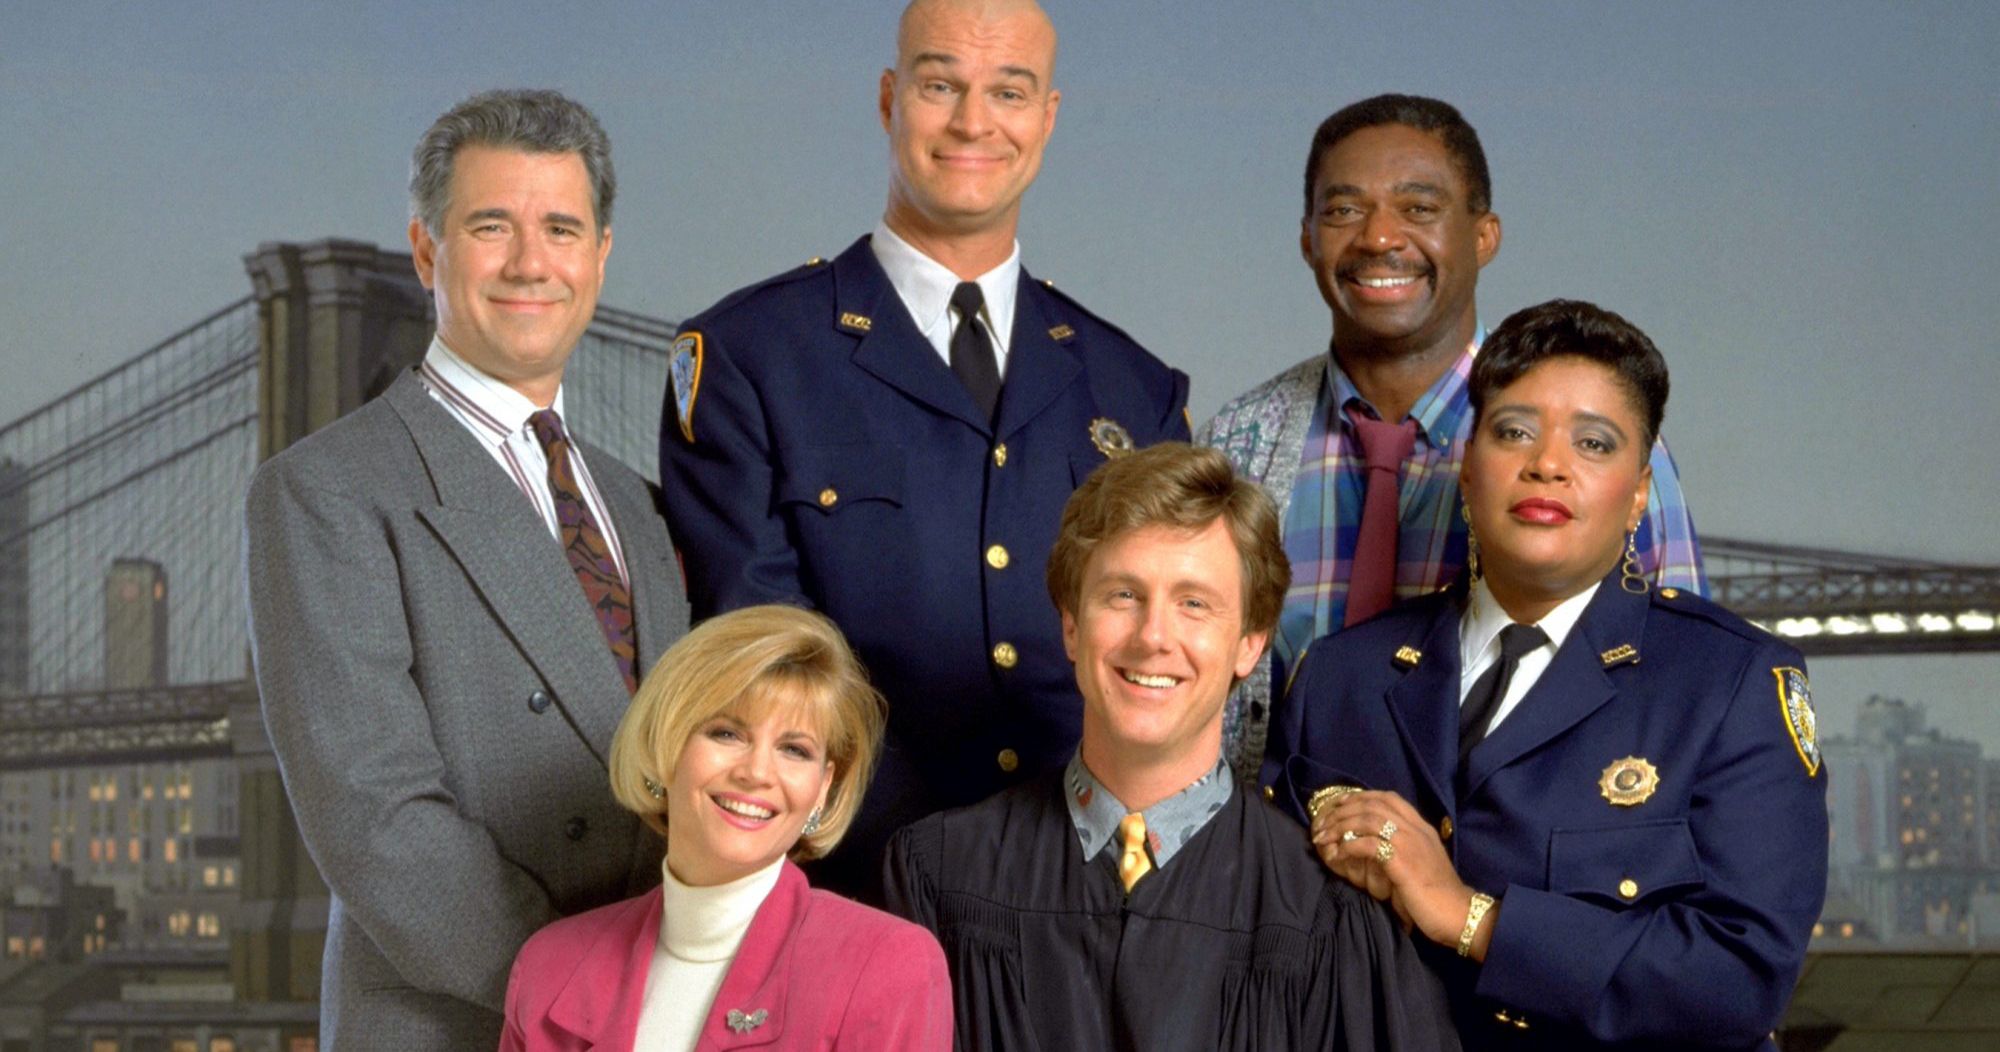 Night Court Sequel Series Is Happening at NBC with John Larroquette